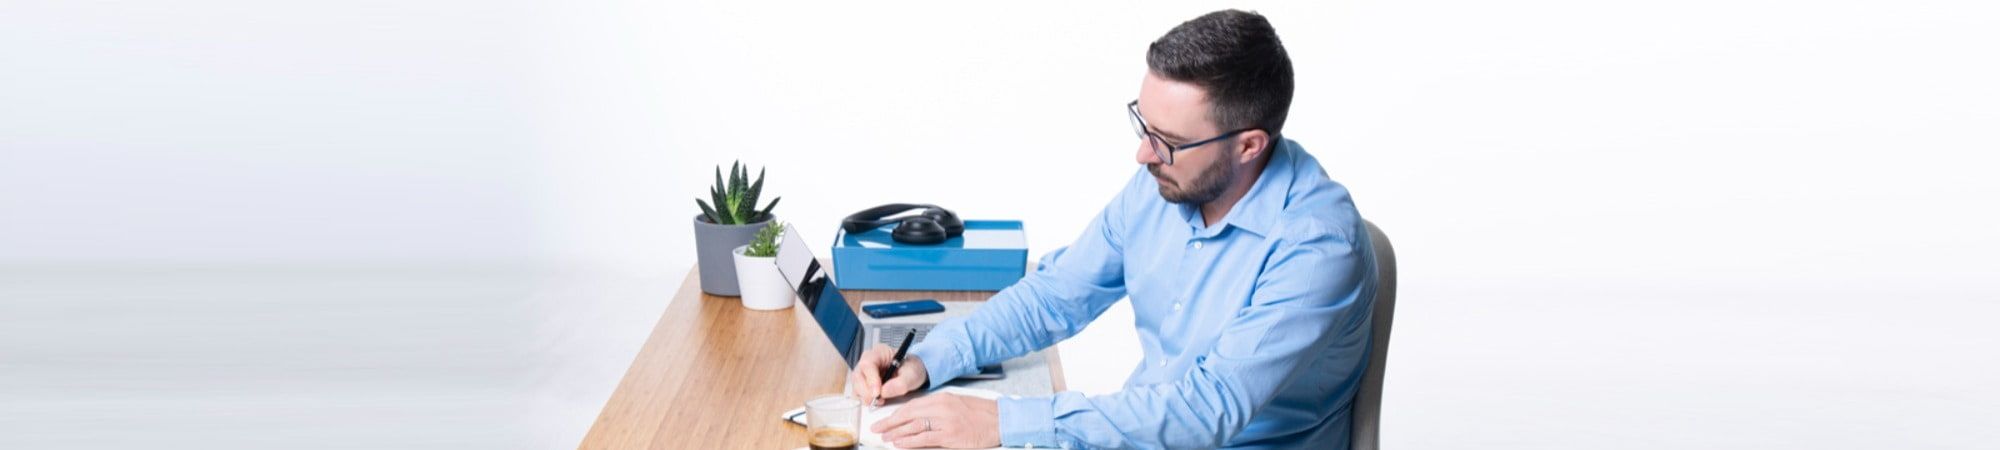 Man at desk with laptop writing